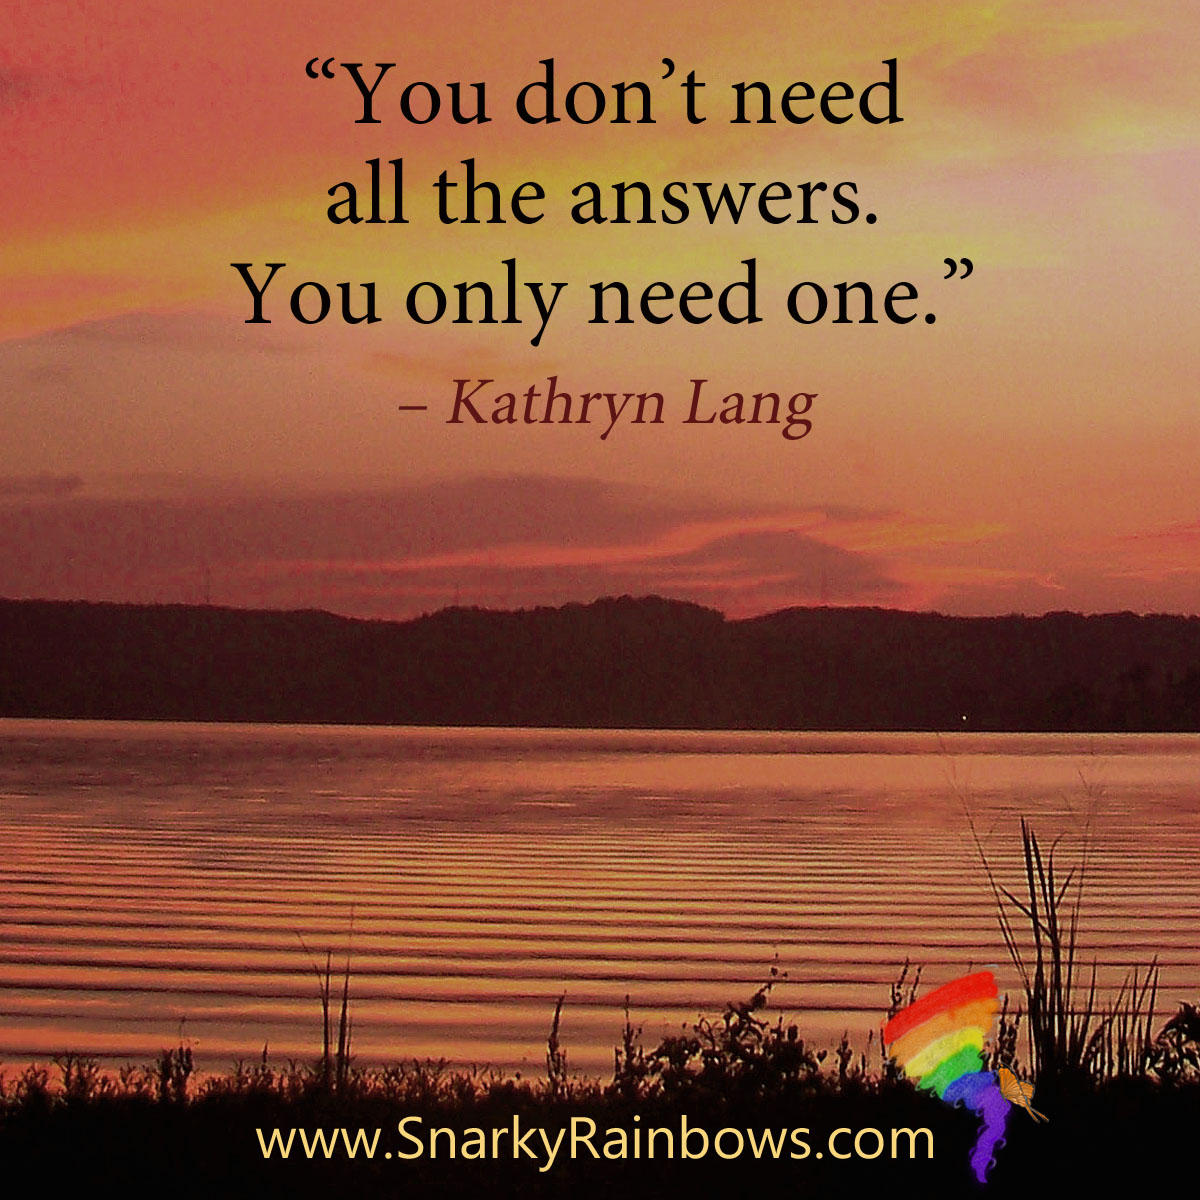 #QuoteoftheDay - need only one answer